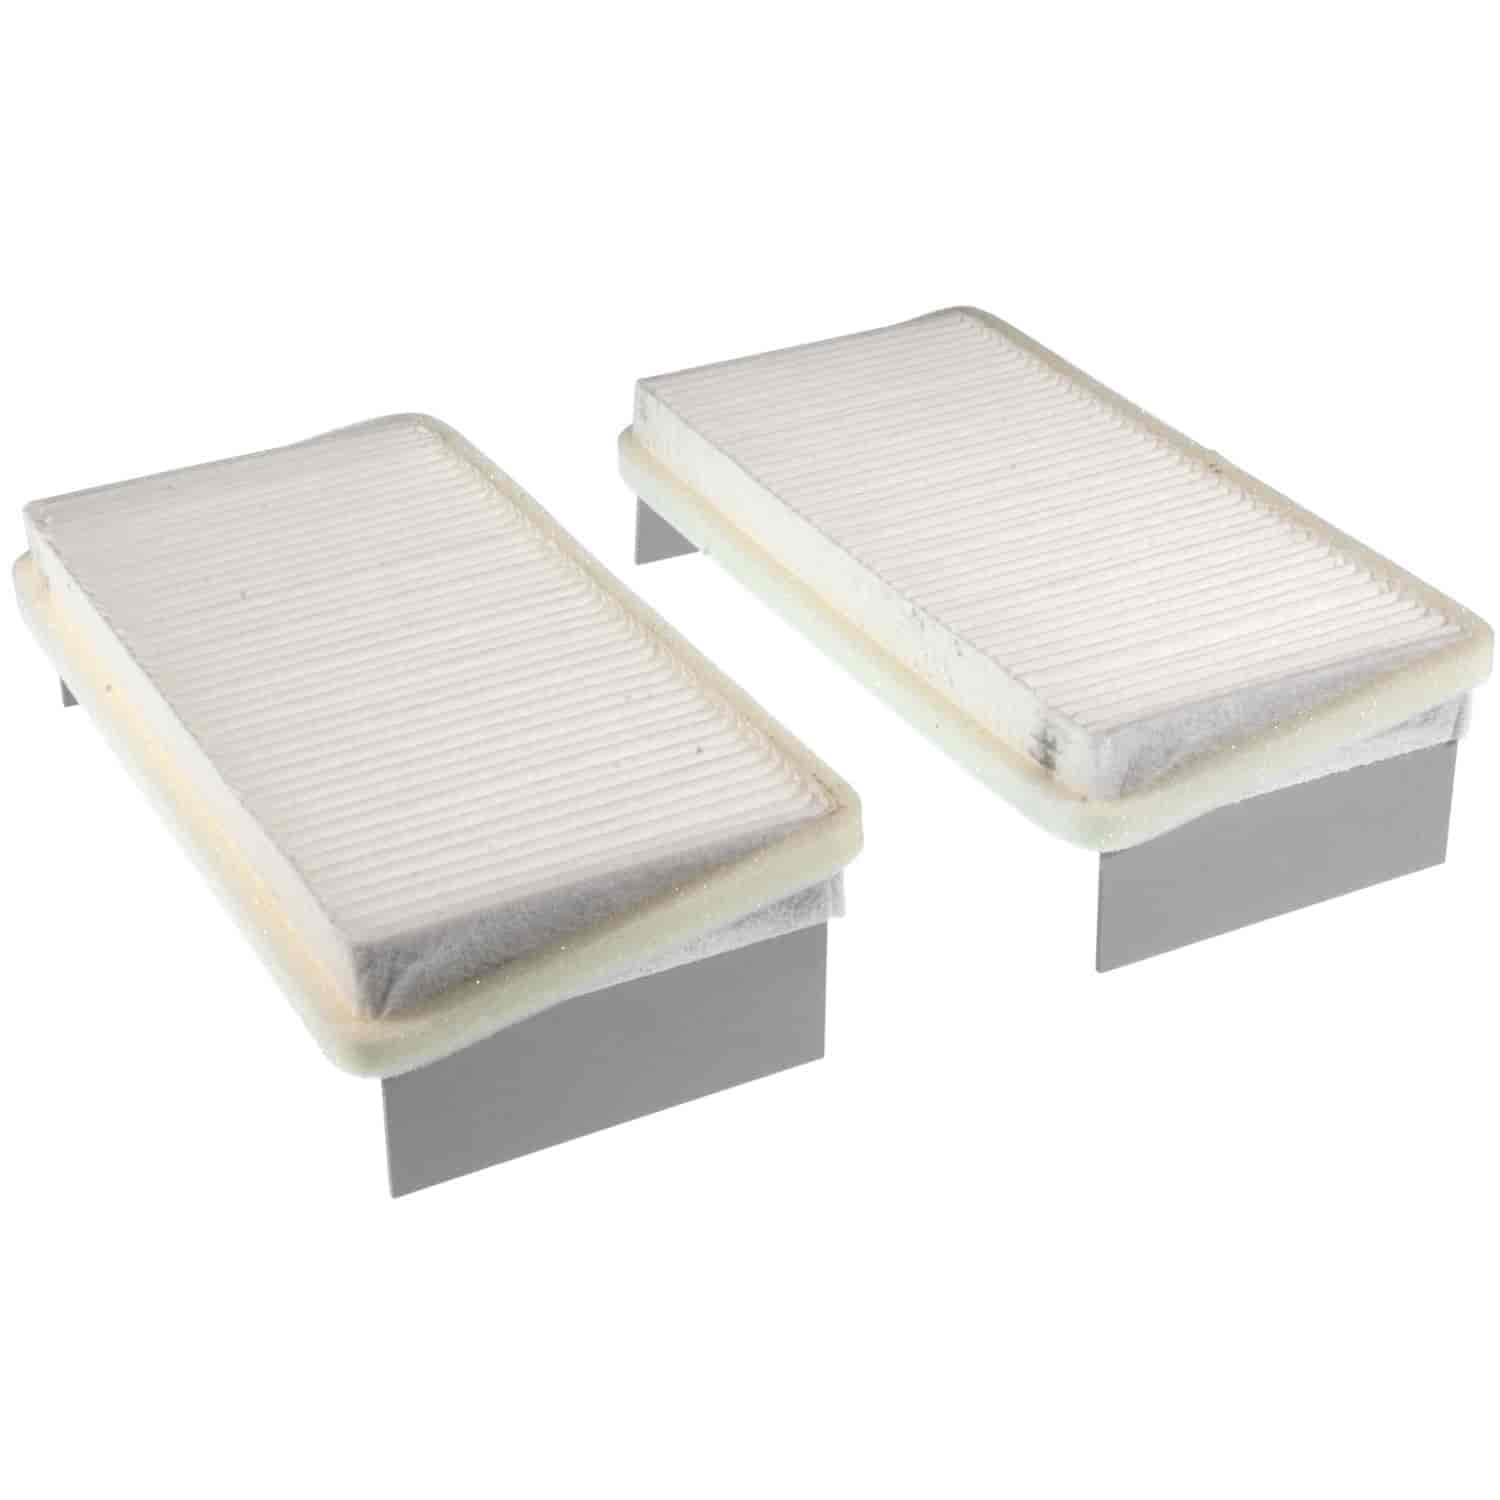 Mahle Cabin Air Filter Chevy Venture 1997-2000 Oldsmobile Silhouette 1997-2000 Pontiac Montana